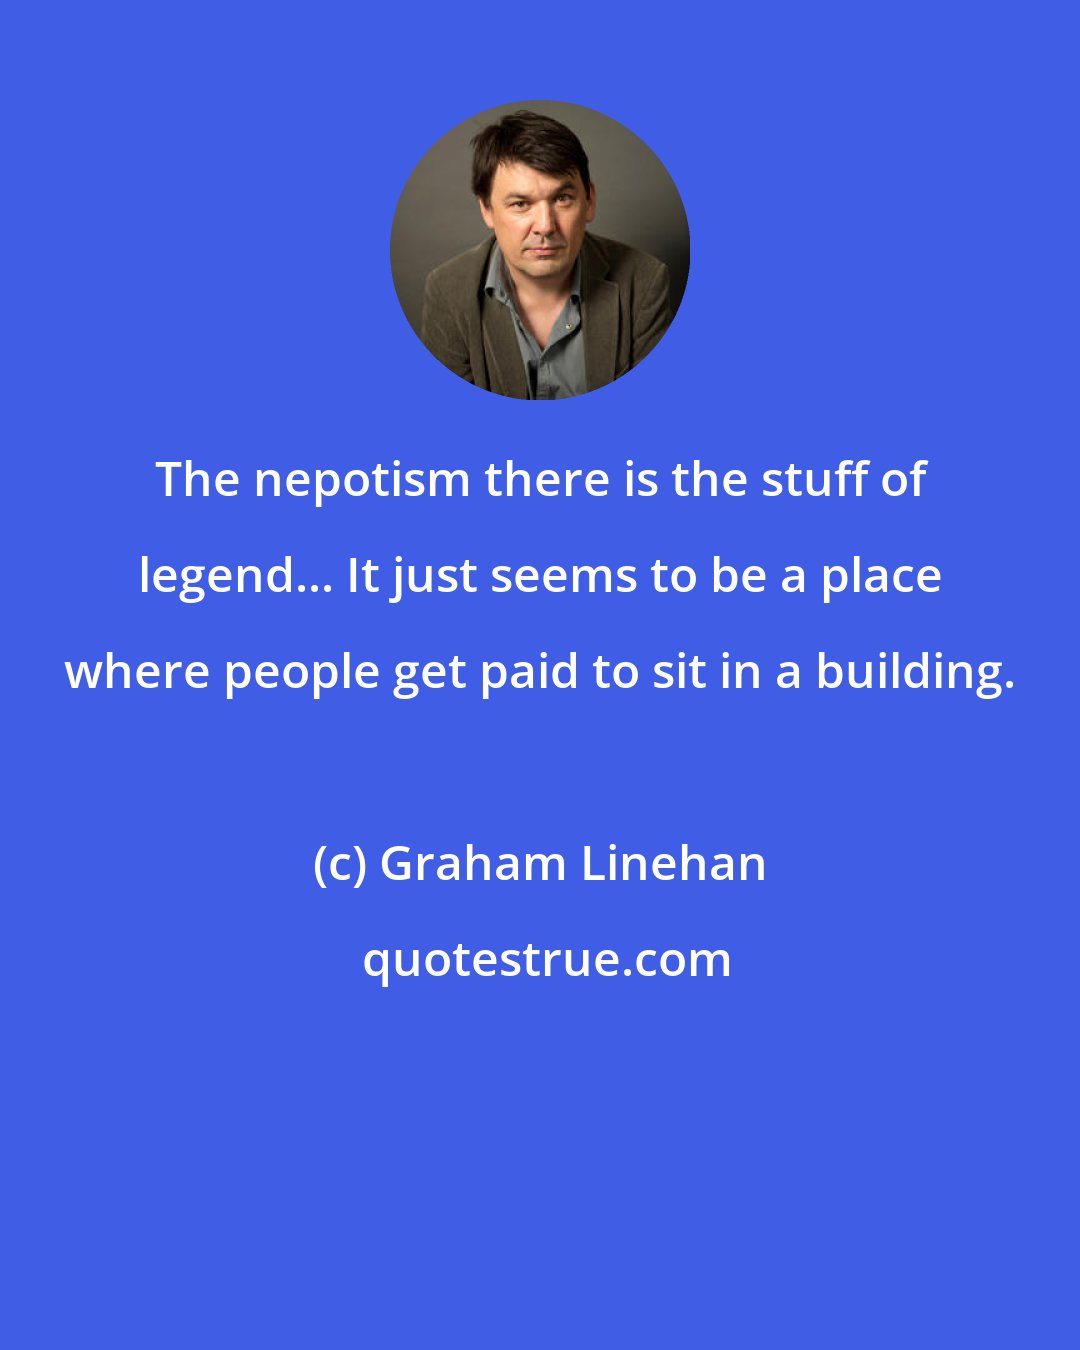 Graham Linehan: The nepotism there is the stuff of legend... It just seems to be a place where people get paid to sit in a building.